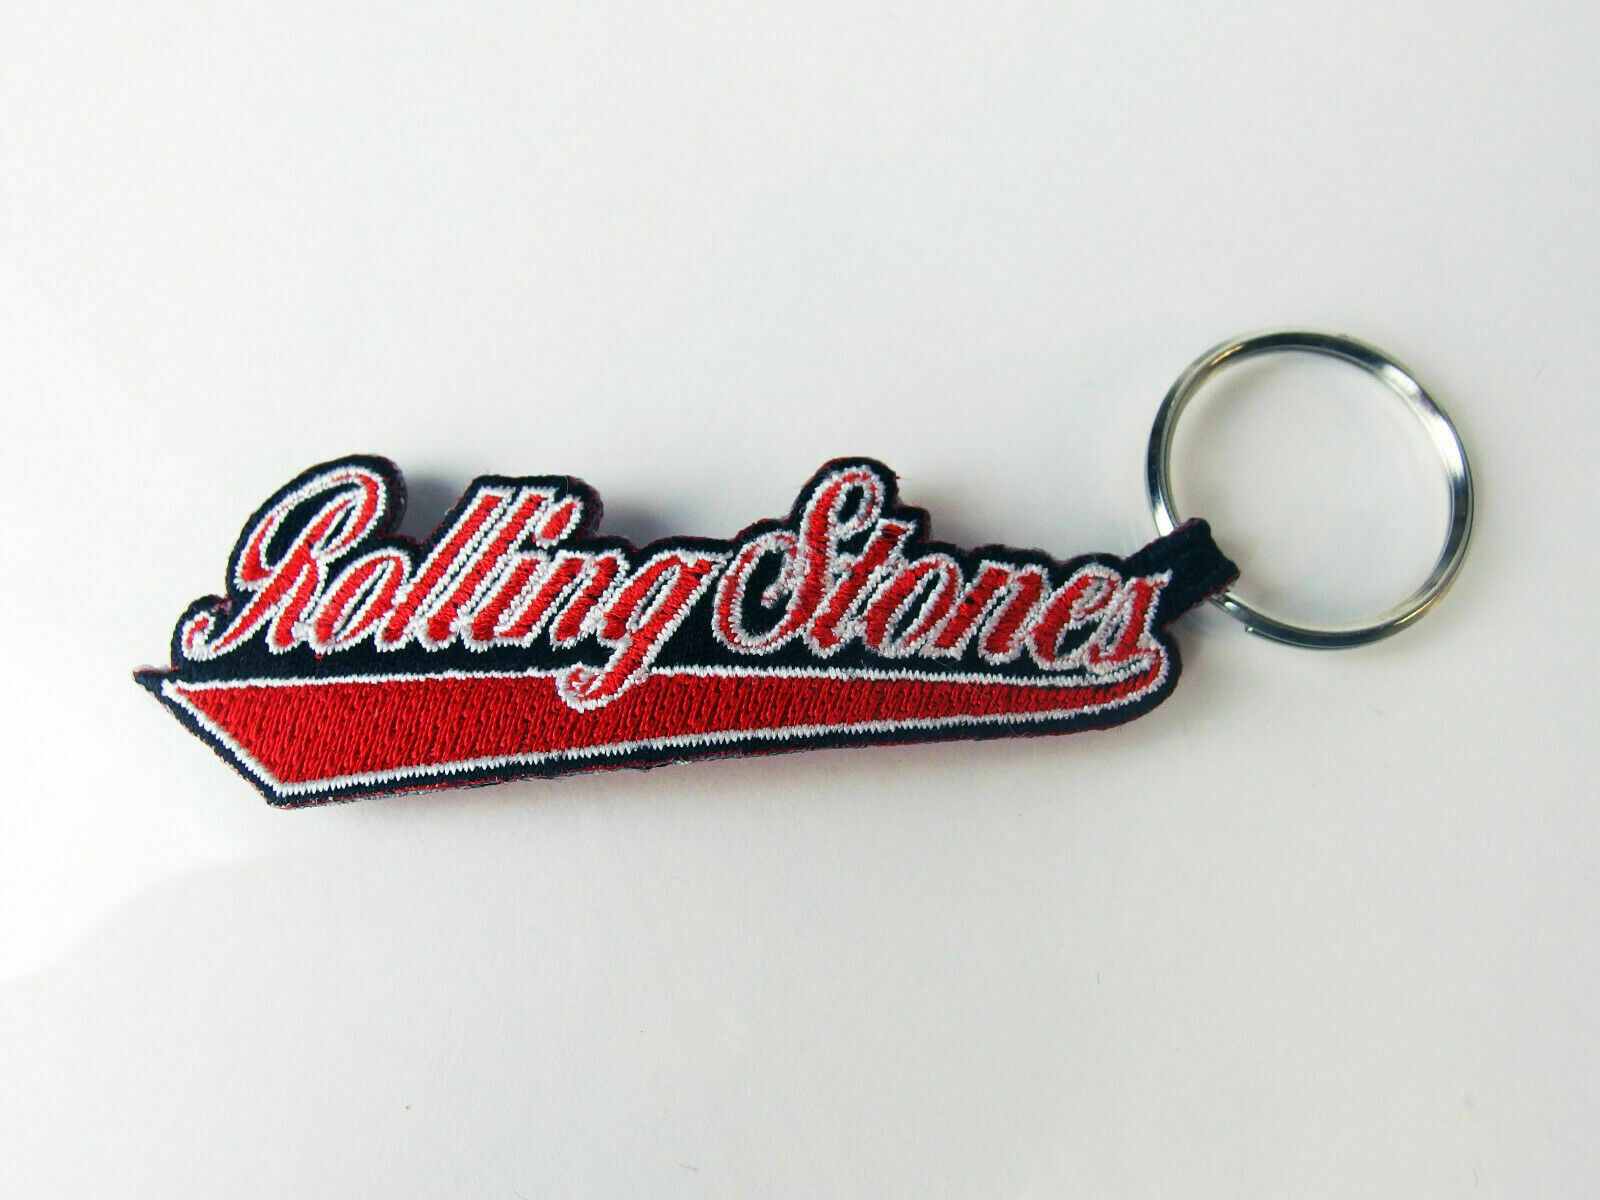 Rolling Stones - C&d Visionary Inc. - Embroidered Logo Keychain